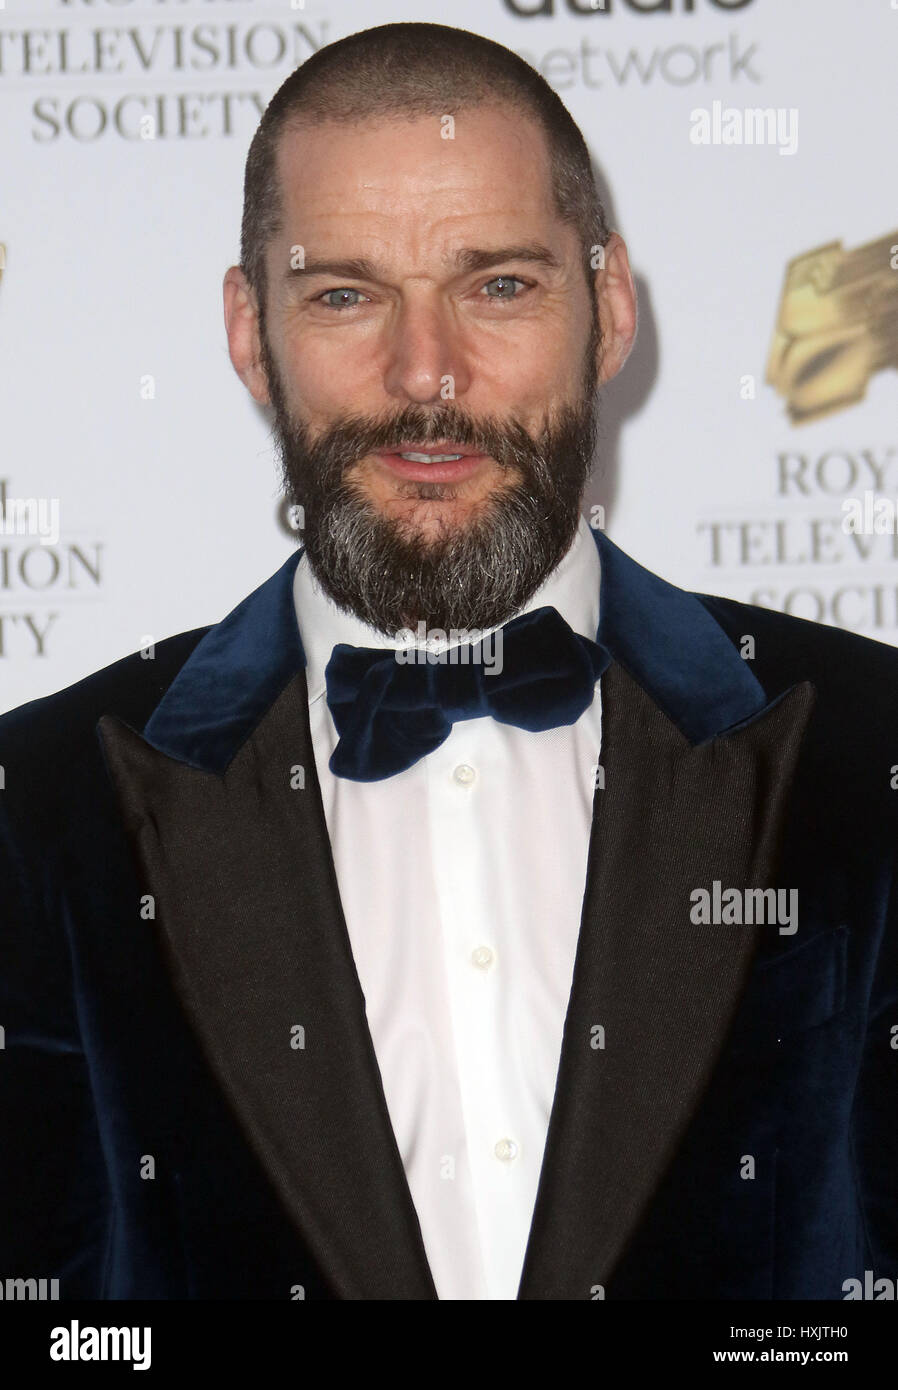 Mar 21, 2017 - Fred Sirieix attending Royal Television Society Awards 2017, Grosvenor House Hotel in London, England, UK Stock Photo